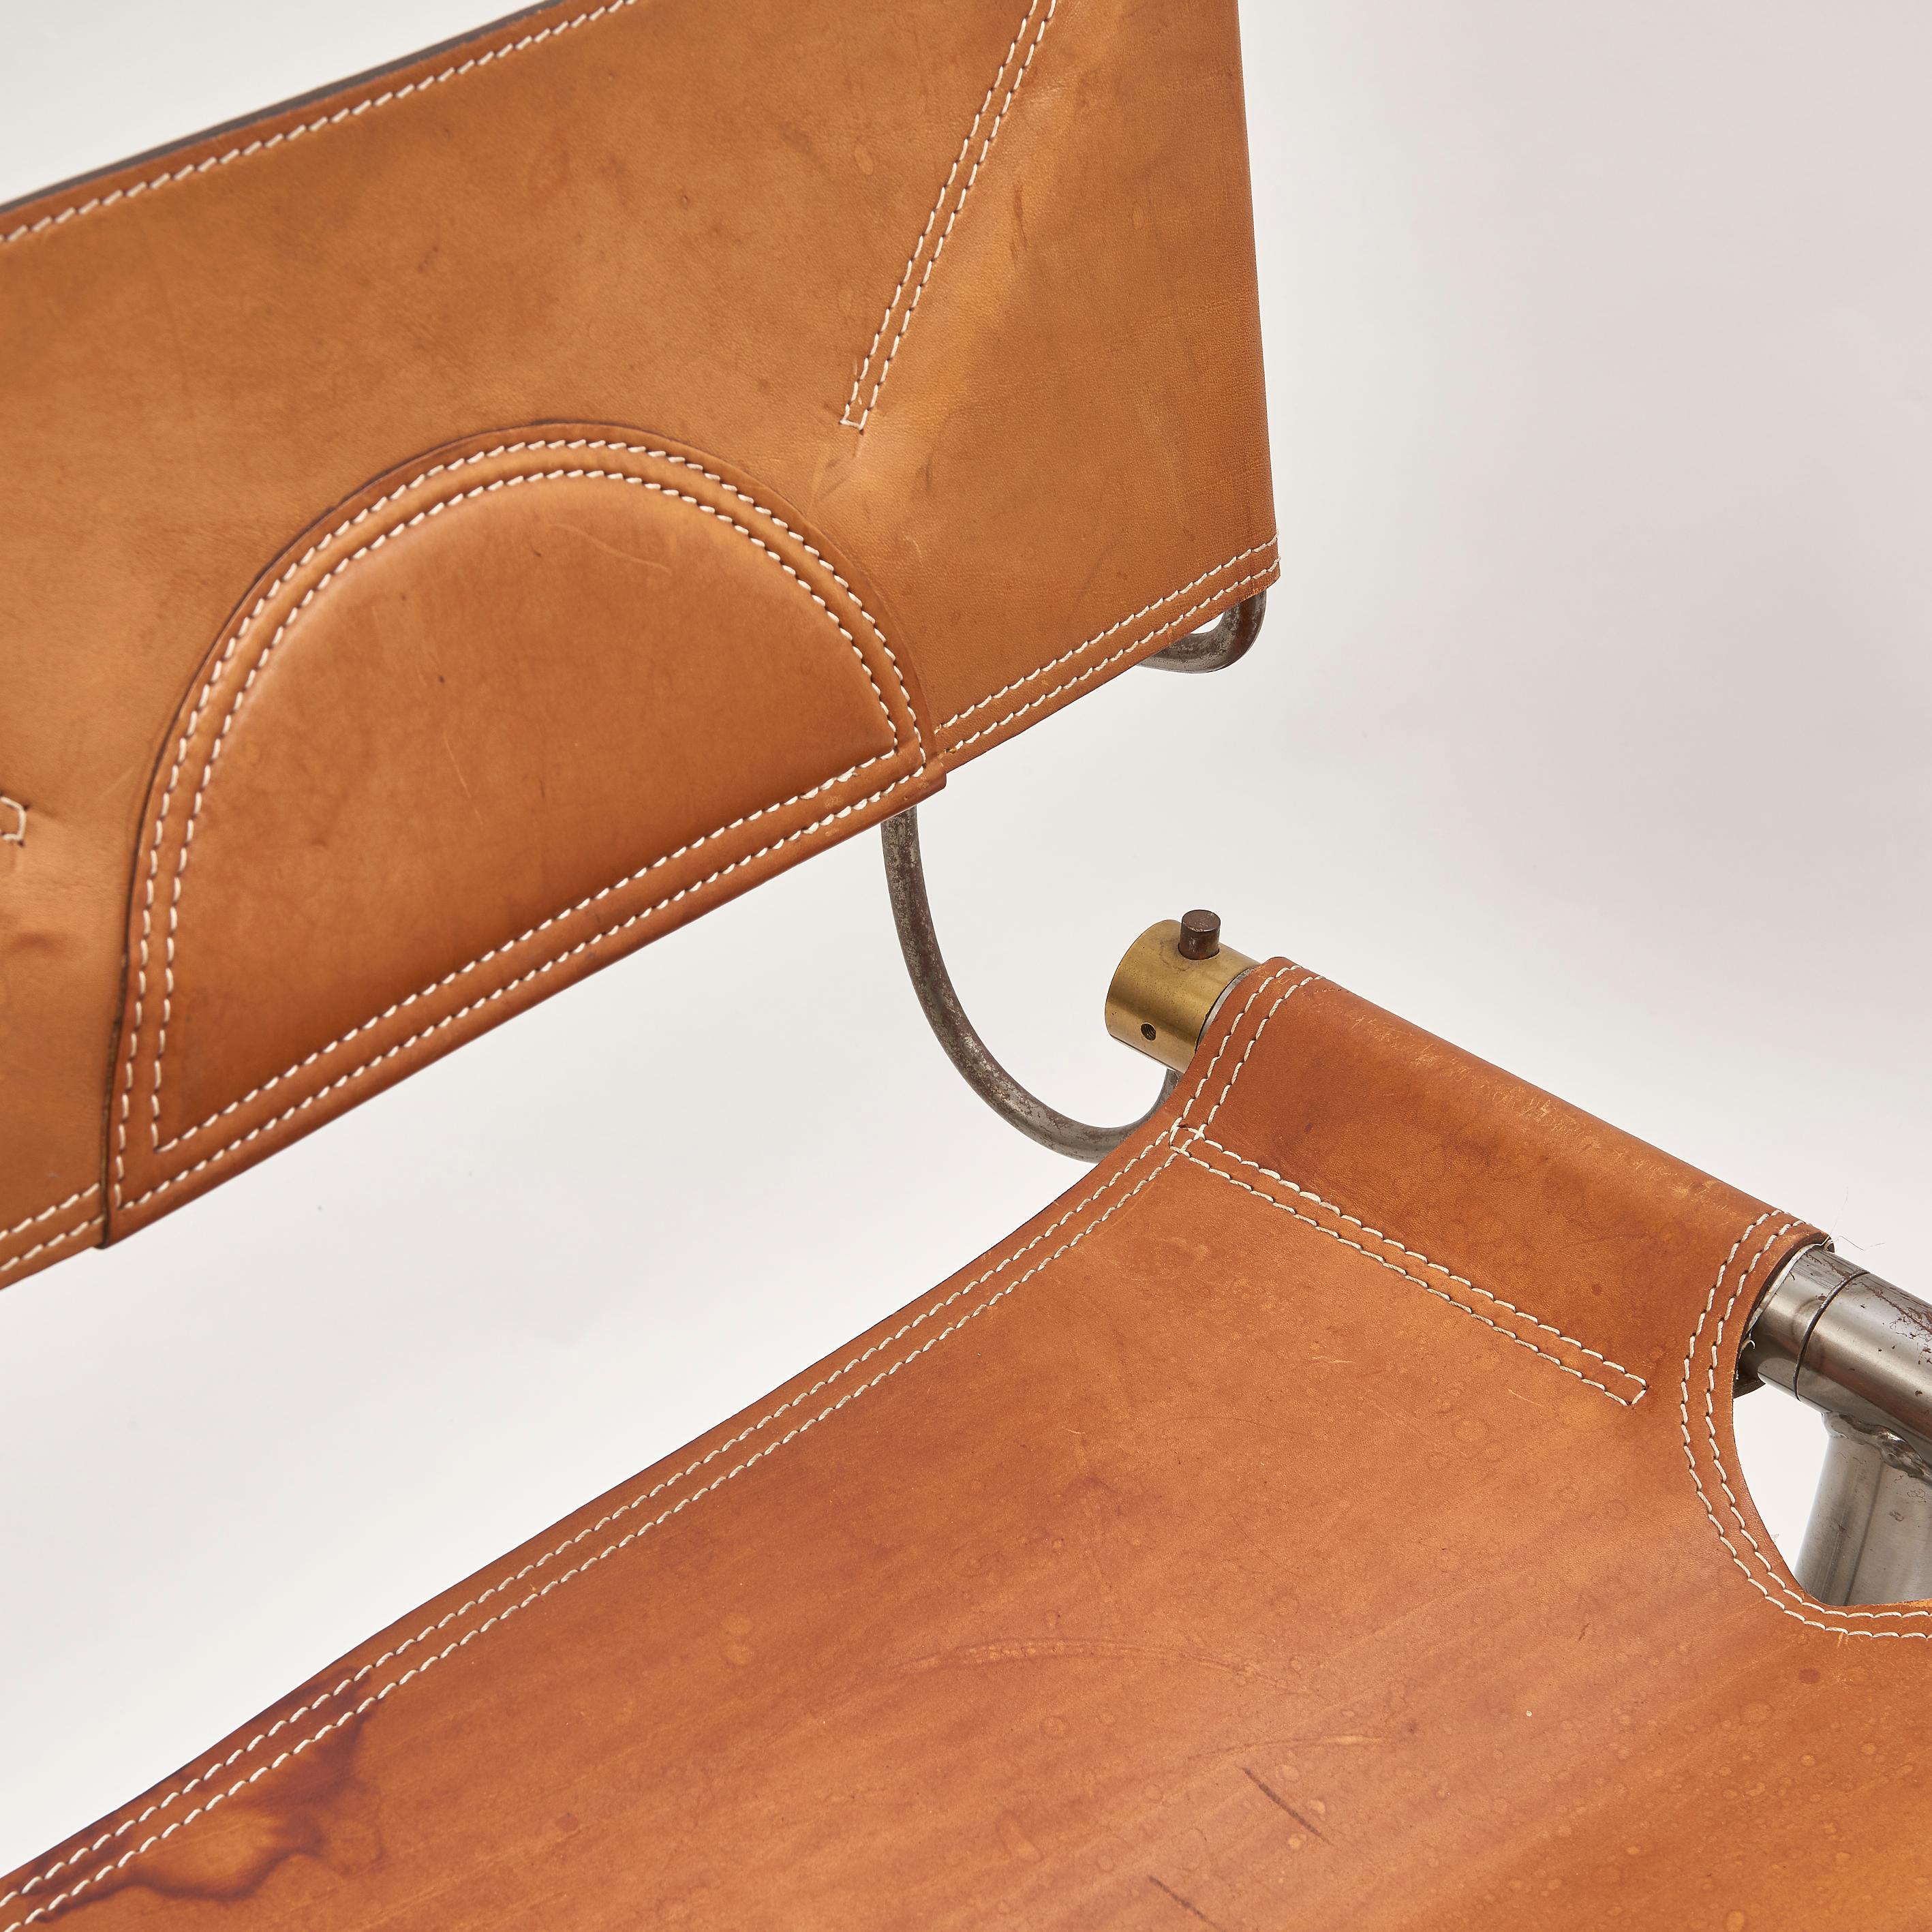 A pair of iconic, custom steel, brass and original leather chairs, by Afra and Tobia Scarpa, circa 1985, which were designed for the Benetton Headquarters, circa 1985. This architecture and design duo are internationally renowned, and original